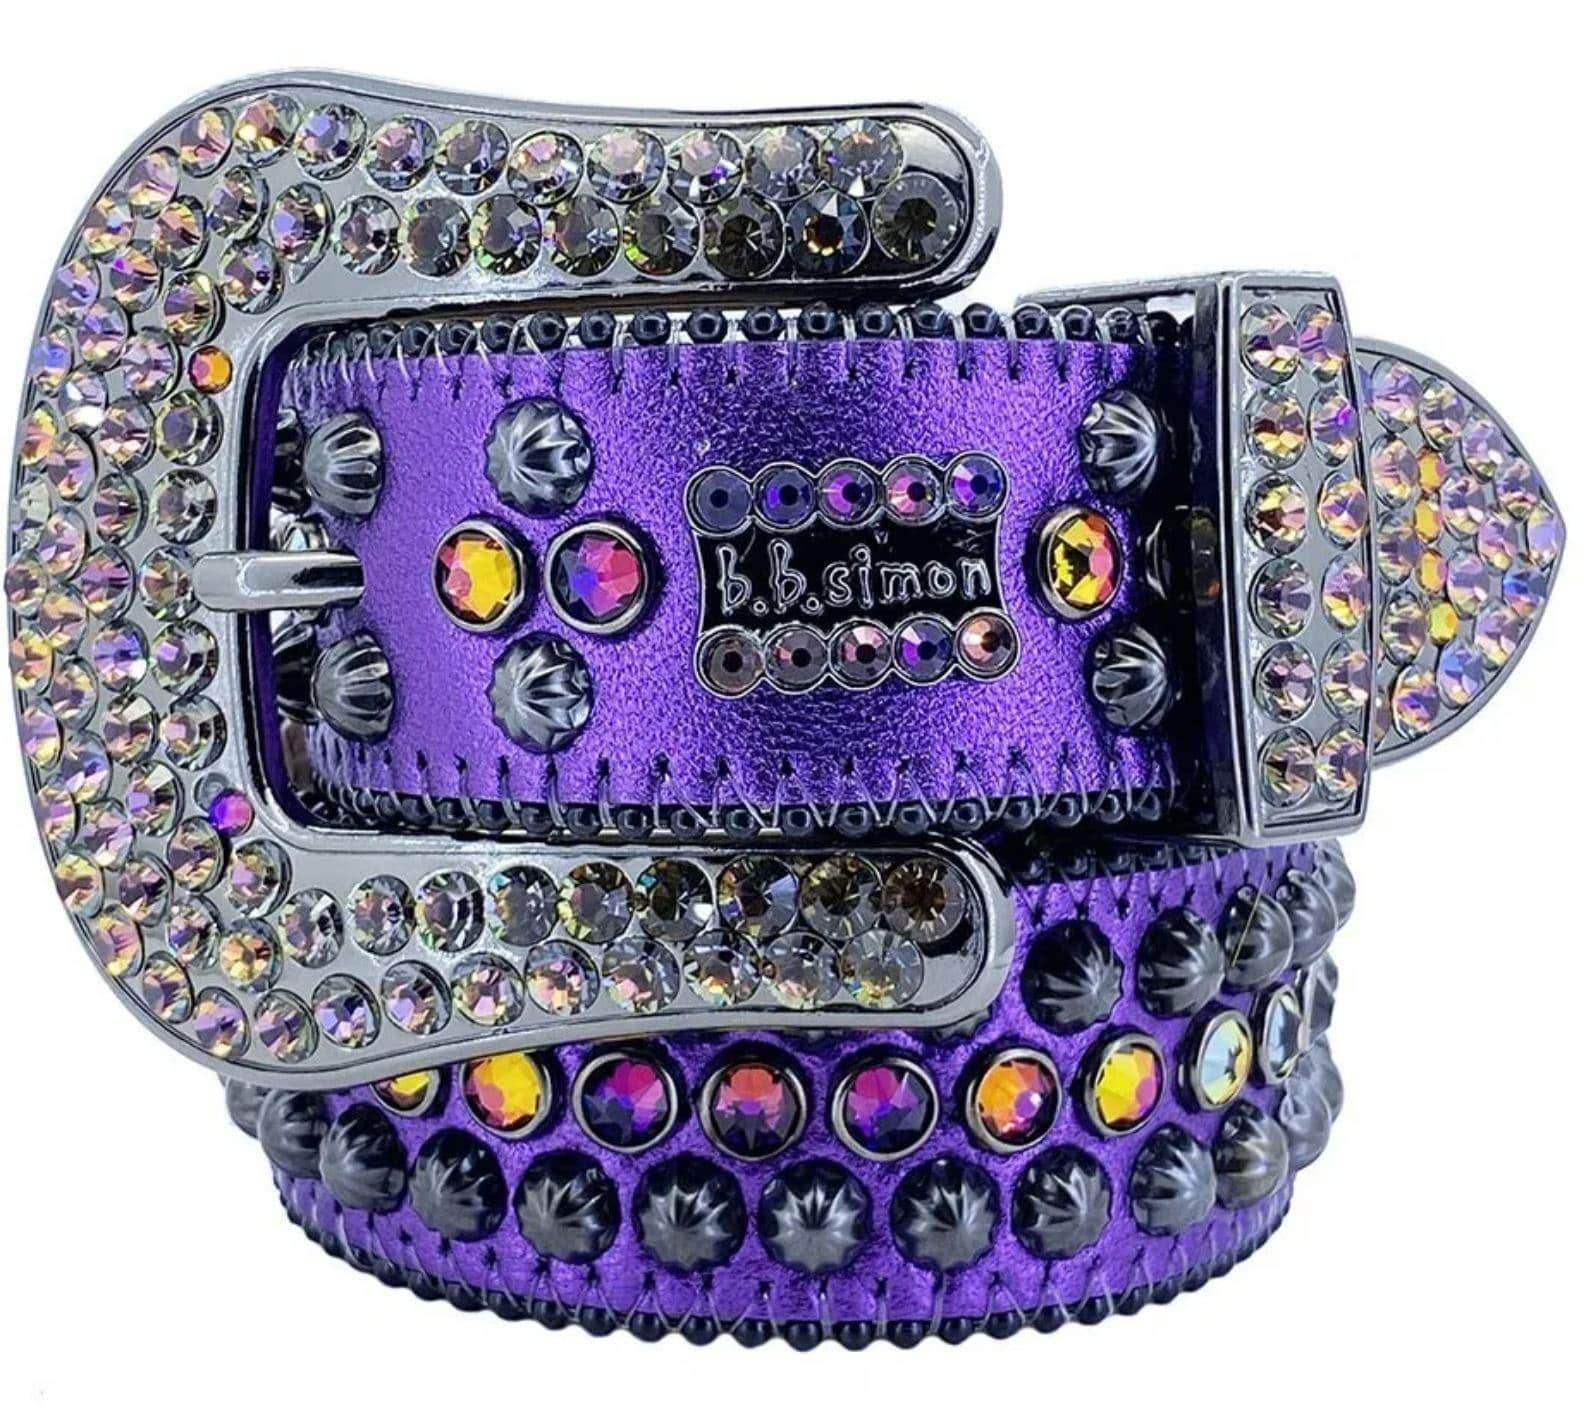 2682 K47 - BB Simon belts Purple Leather with Crystals Belt - Amore Accessories